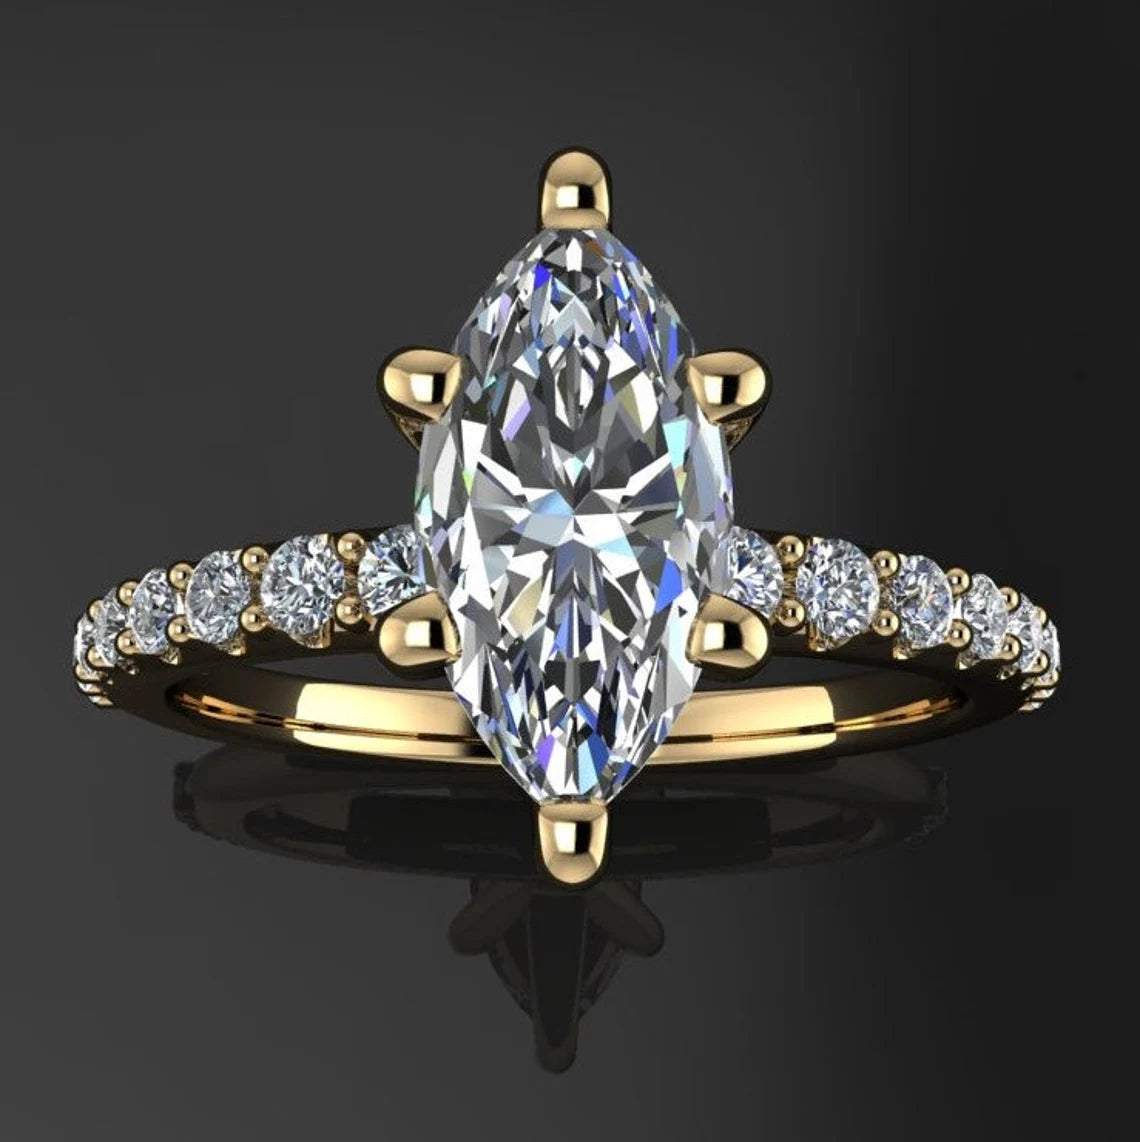 blaire ring - 1.5 carat marquise ZAYA moissanite engagement ring, d color moissanite - J Hollywood Designs